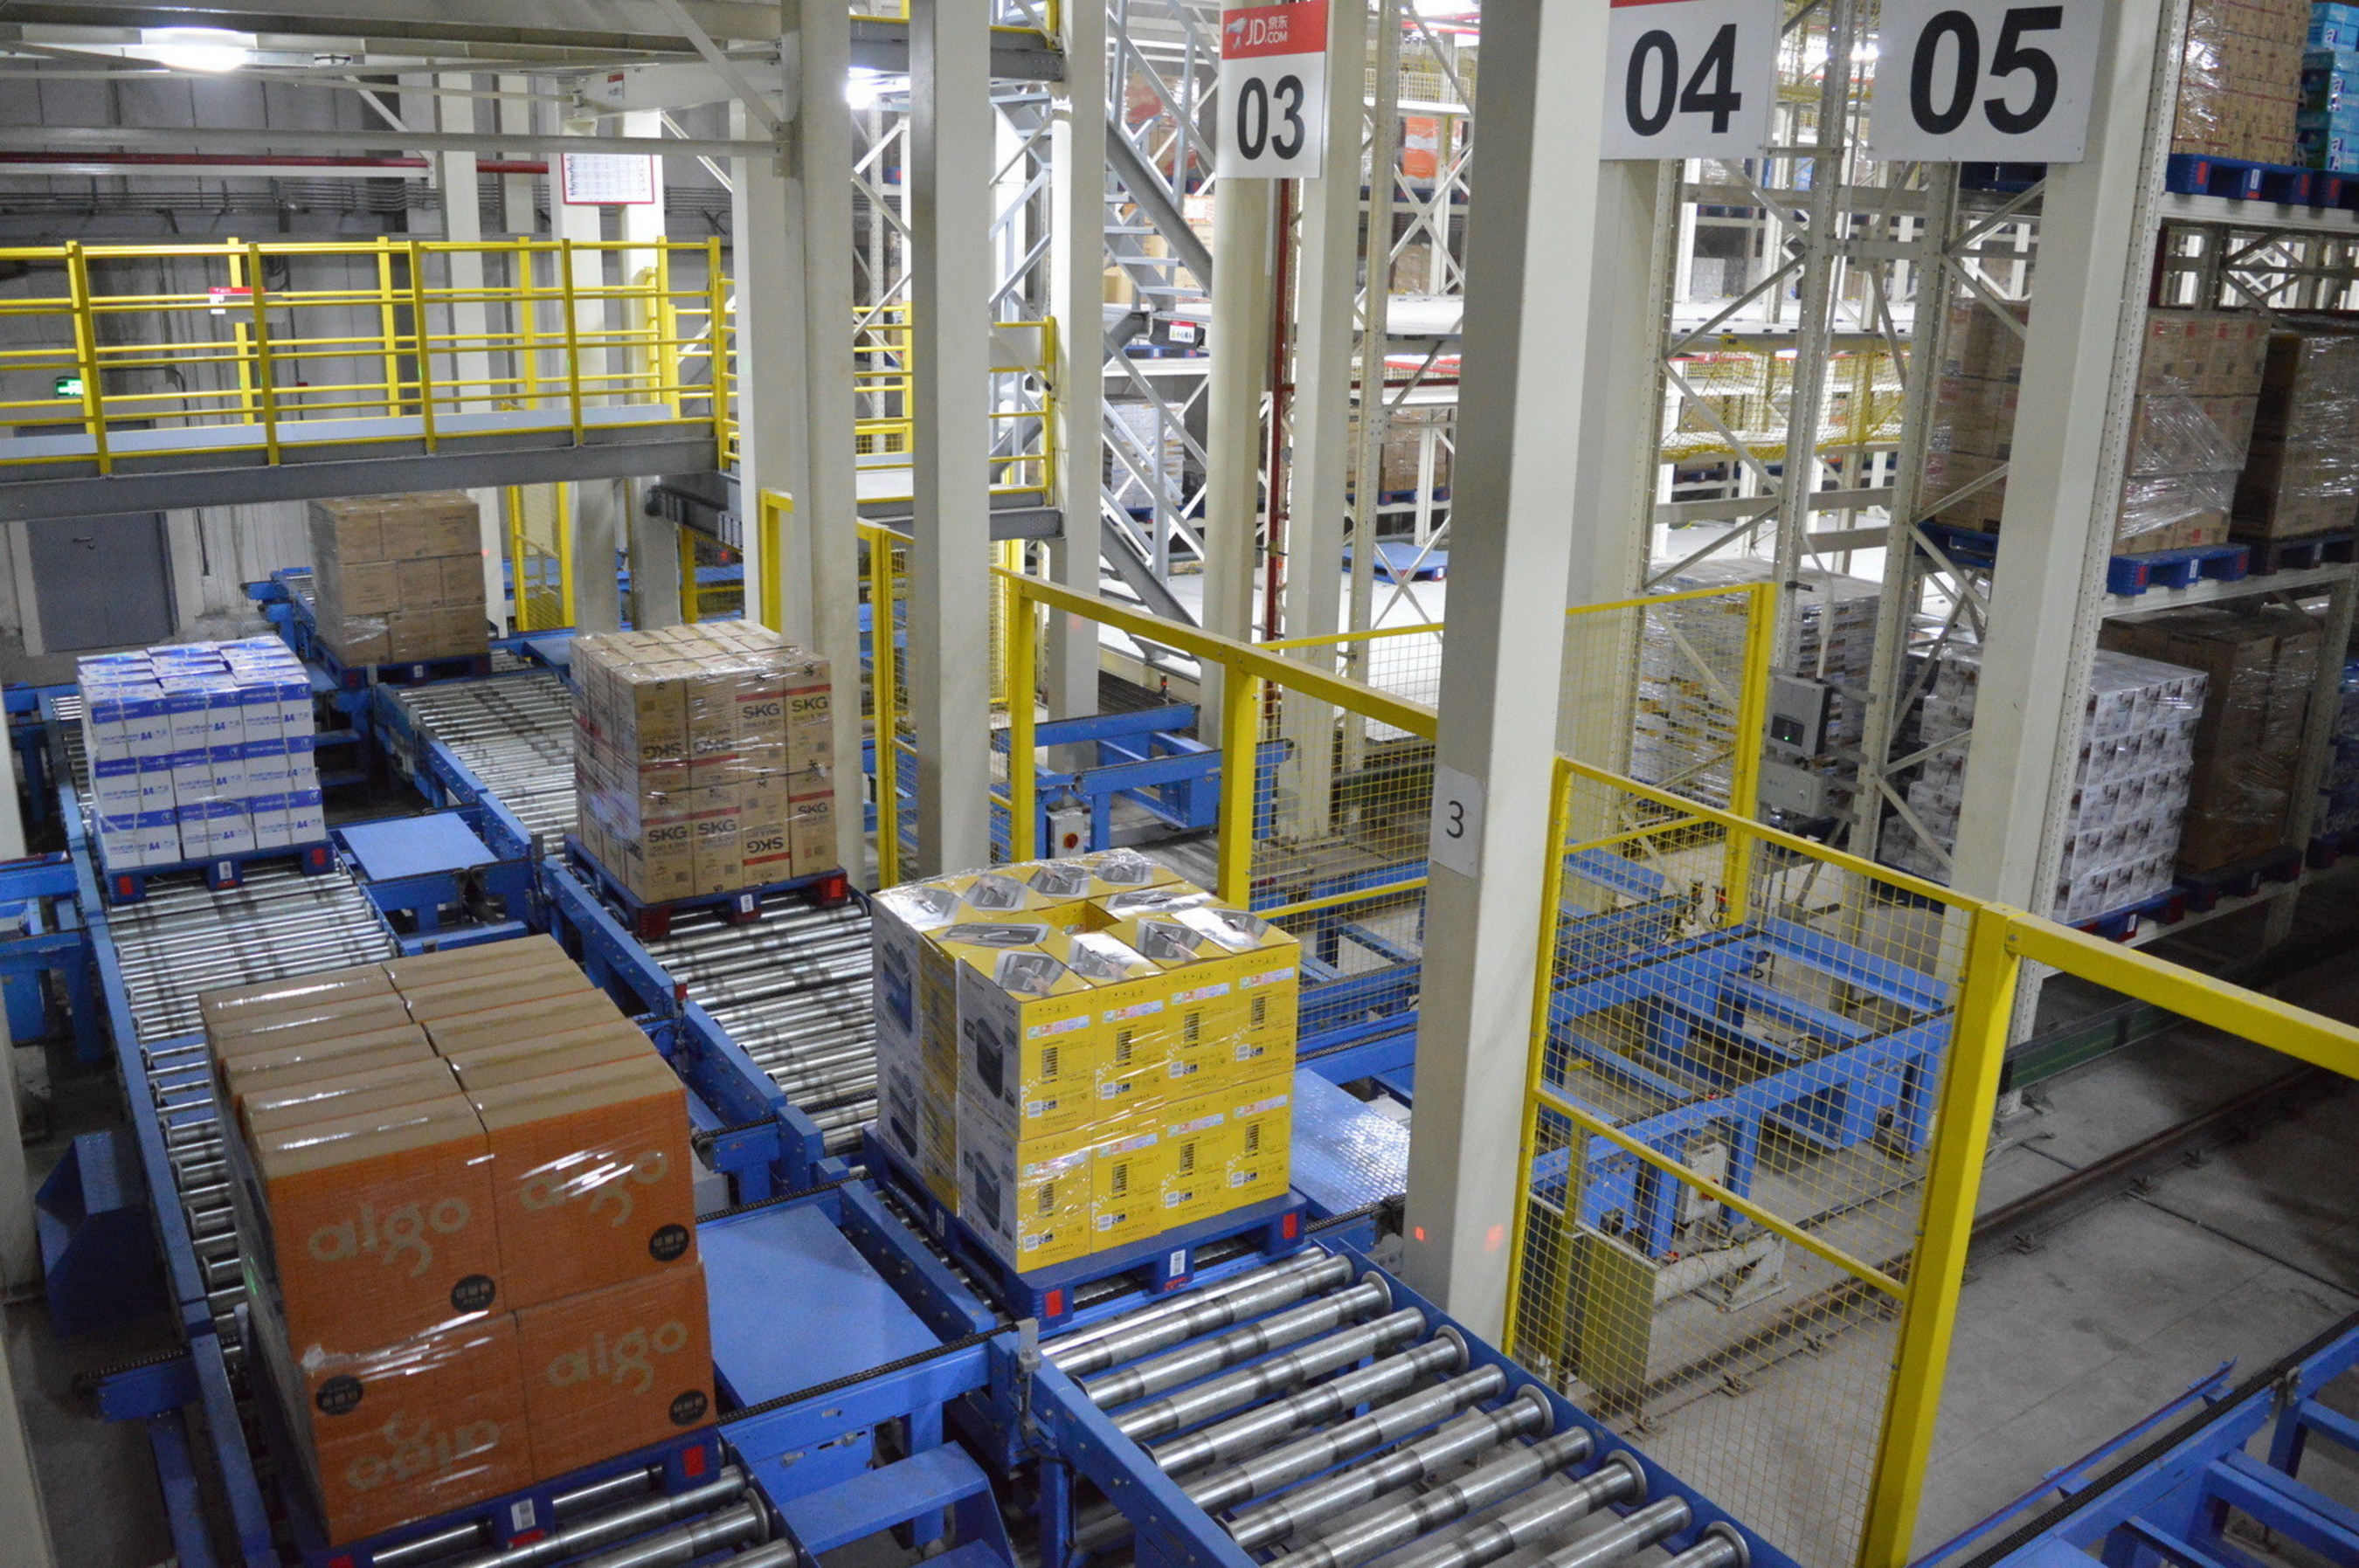 JD.com launched the initial phase of its Asia No. 1 Shanghai warehouse on October 20, 2014